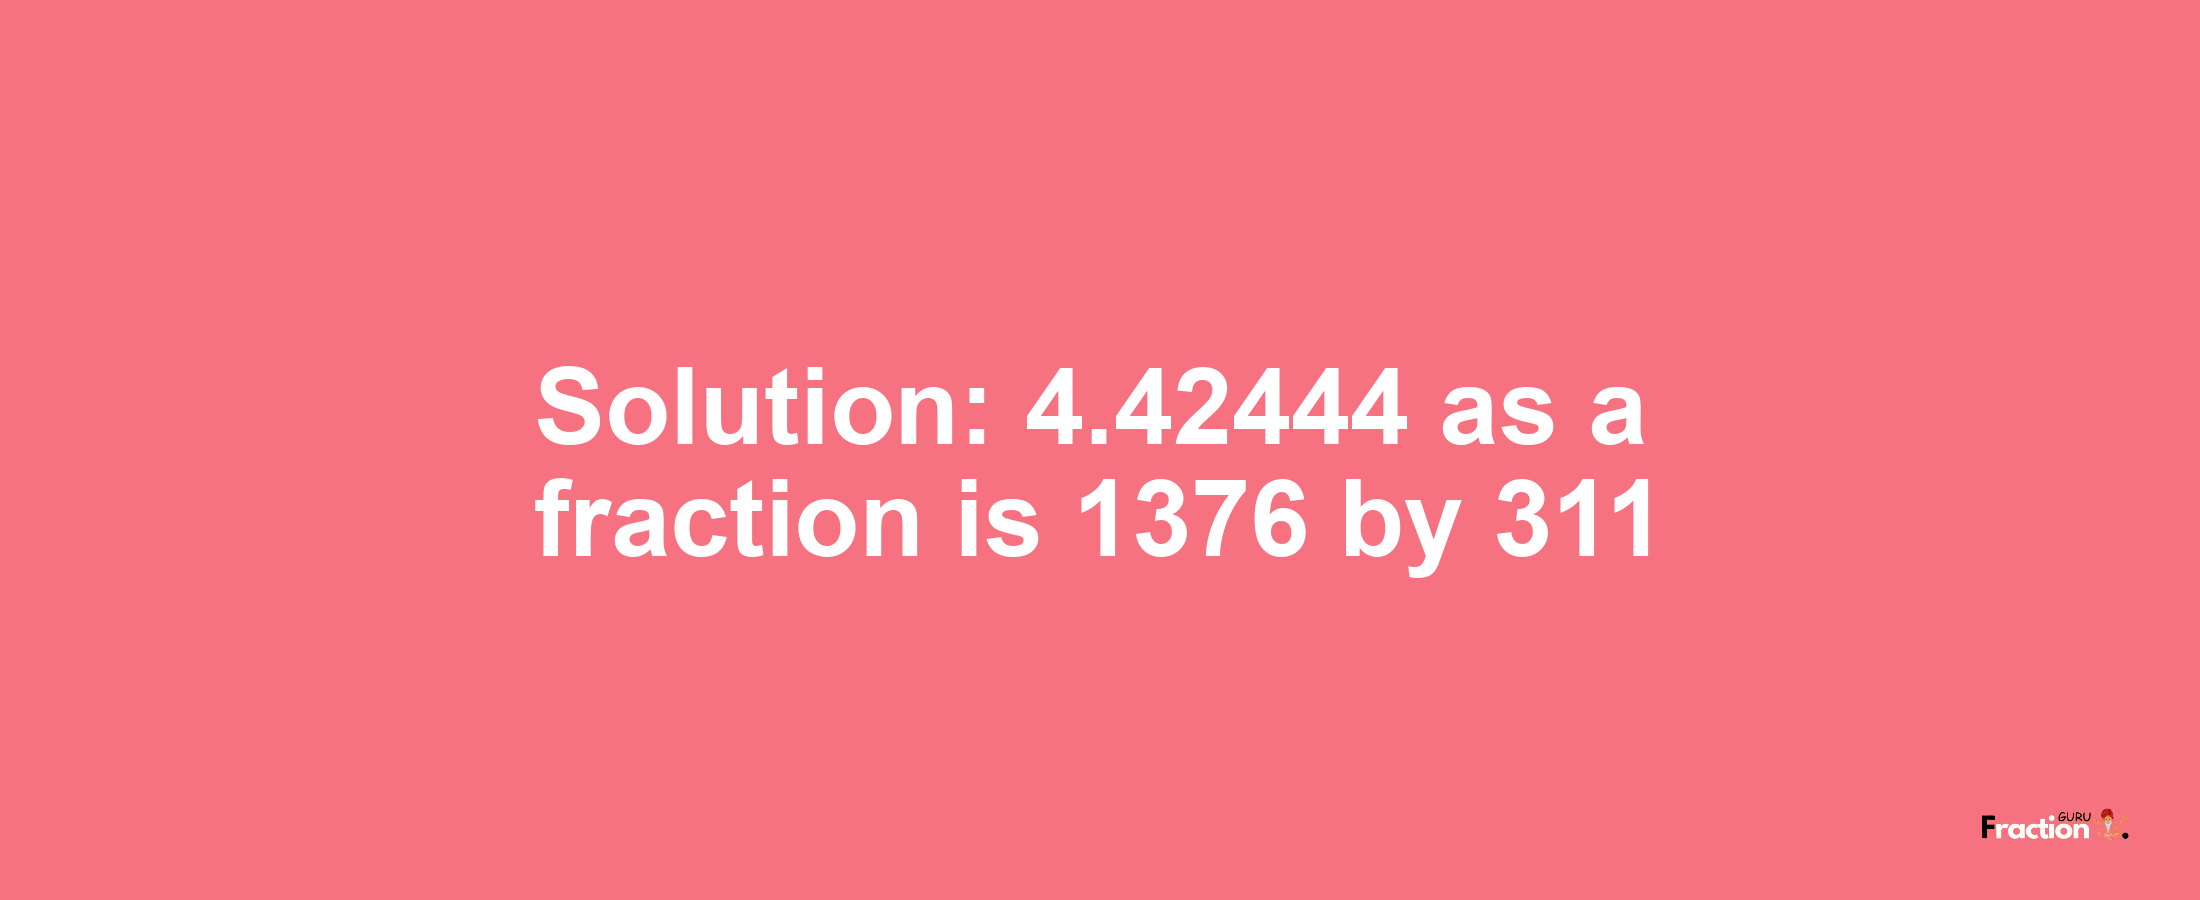 Solution:4.42444 as a fraction is 1376/311